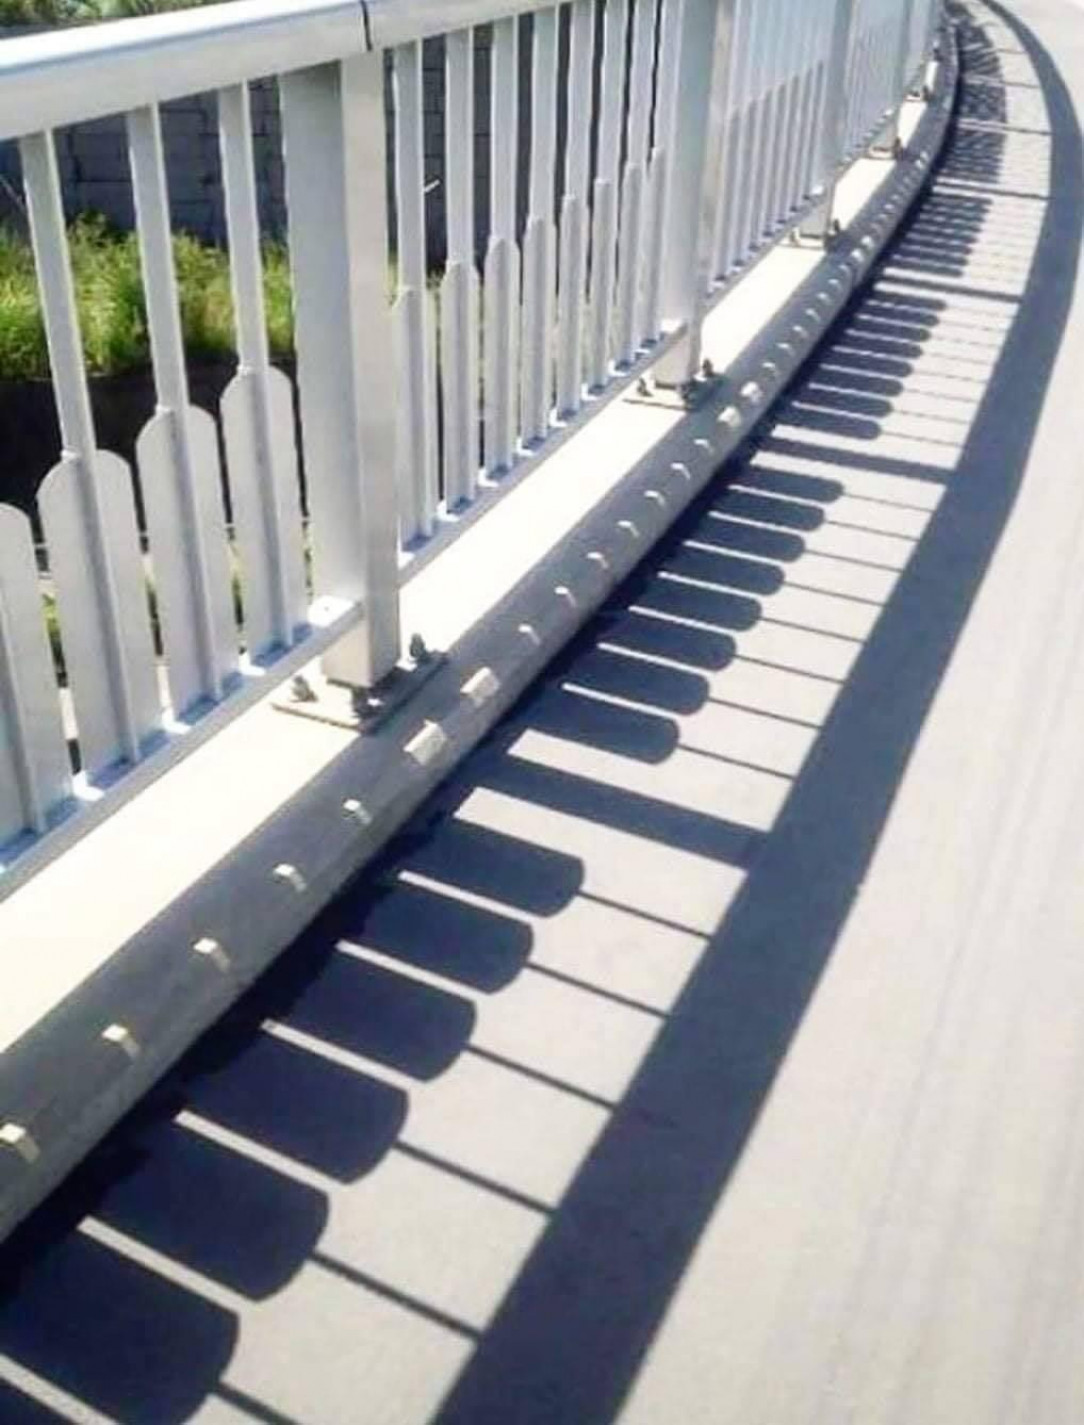 Fence shadows that look like a piano